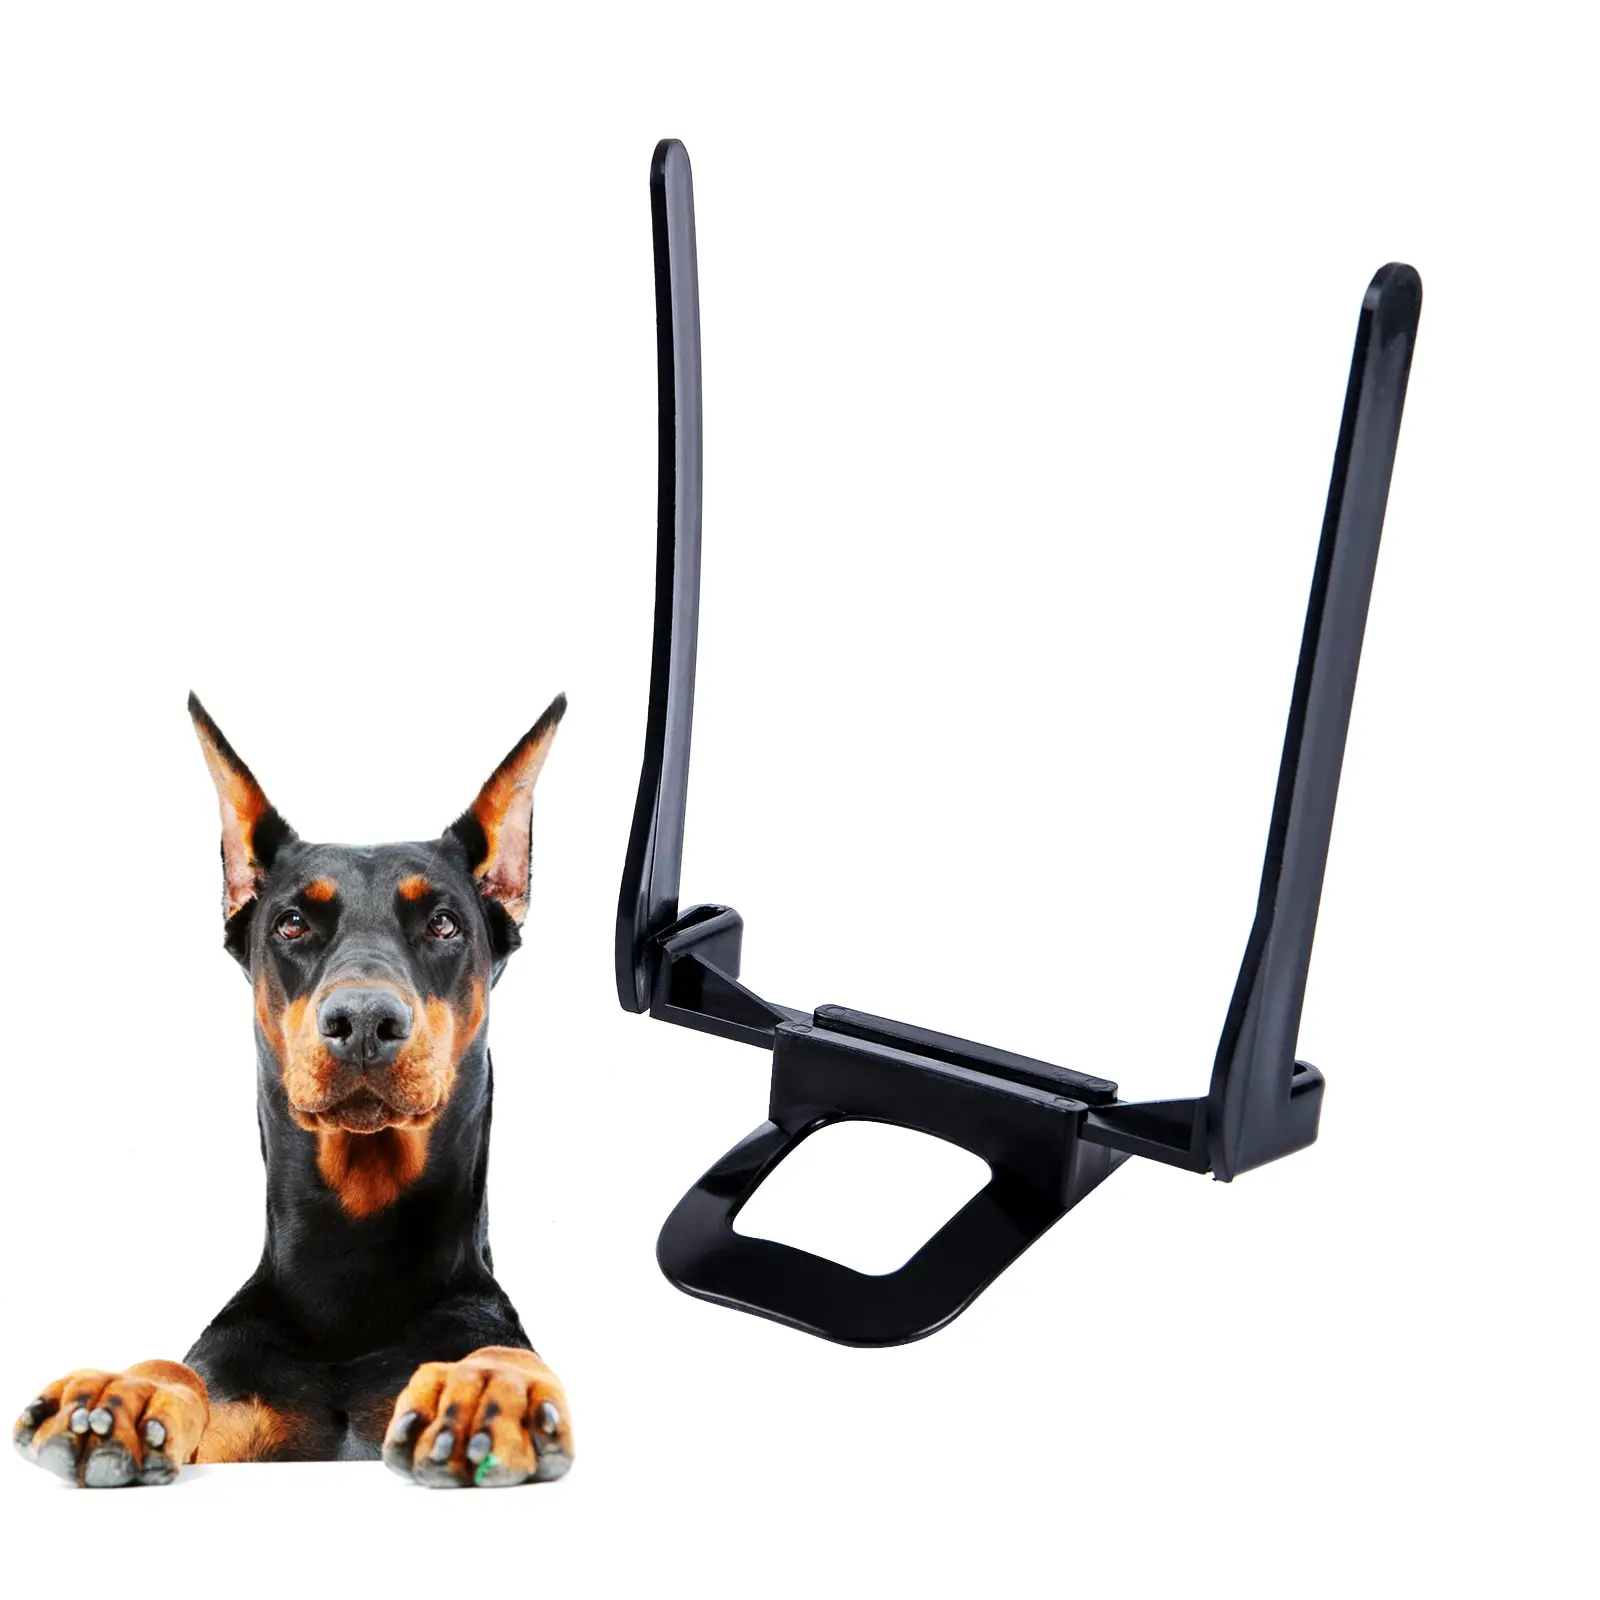 1Pcs Dog Ear Stand Corrector Ear Care Tool Ear Stand Up Tool For Doberman Pinscher Dog Samoyed Great Dane